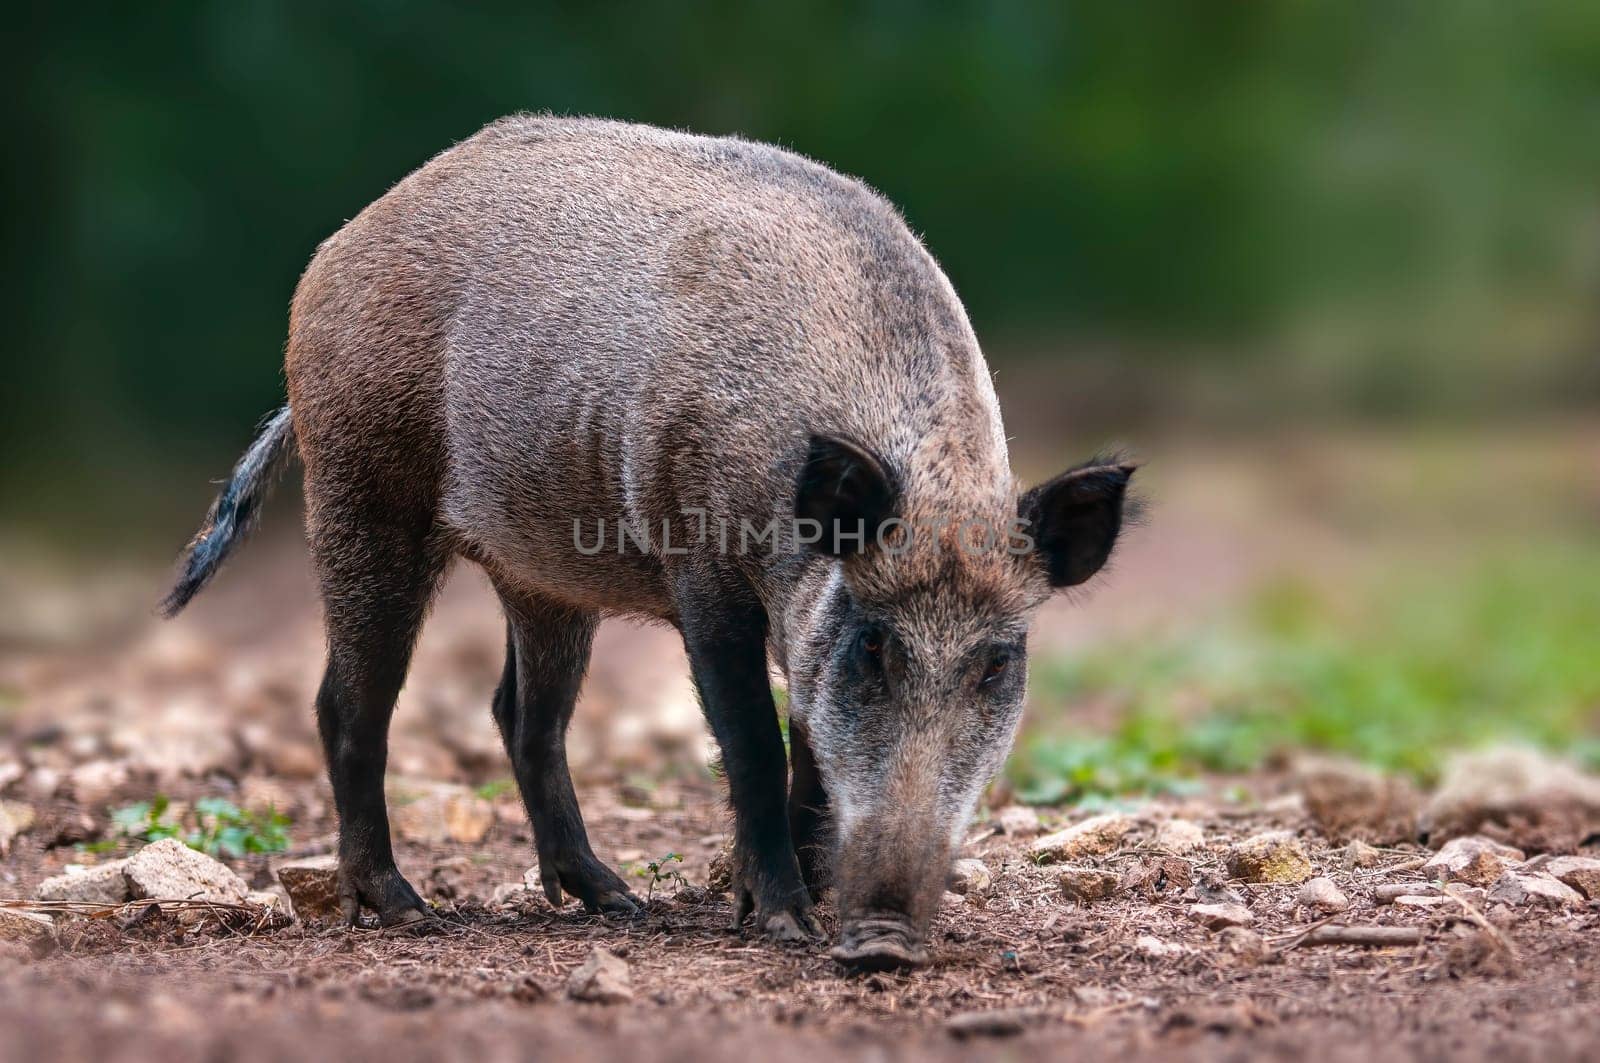 a wild boar in a deciduous forest in autumn by mario_plechaty_photography